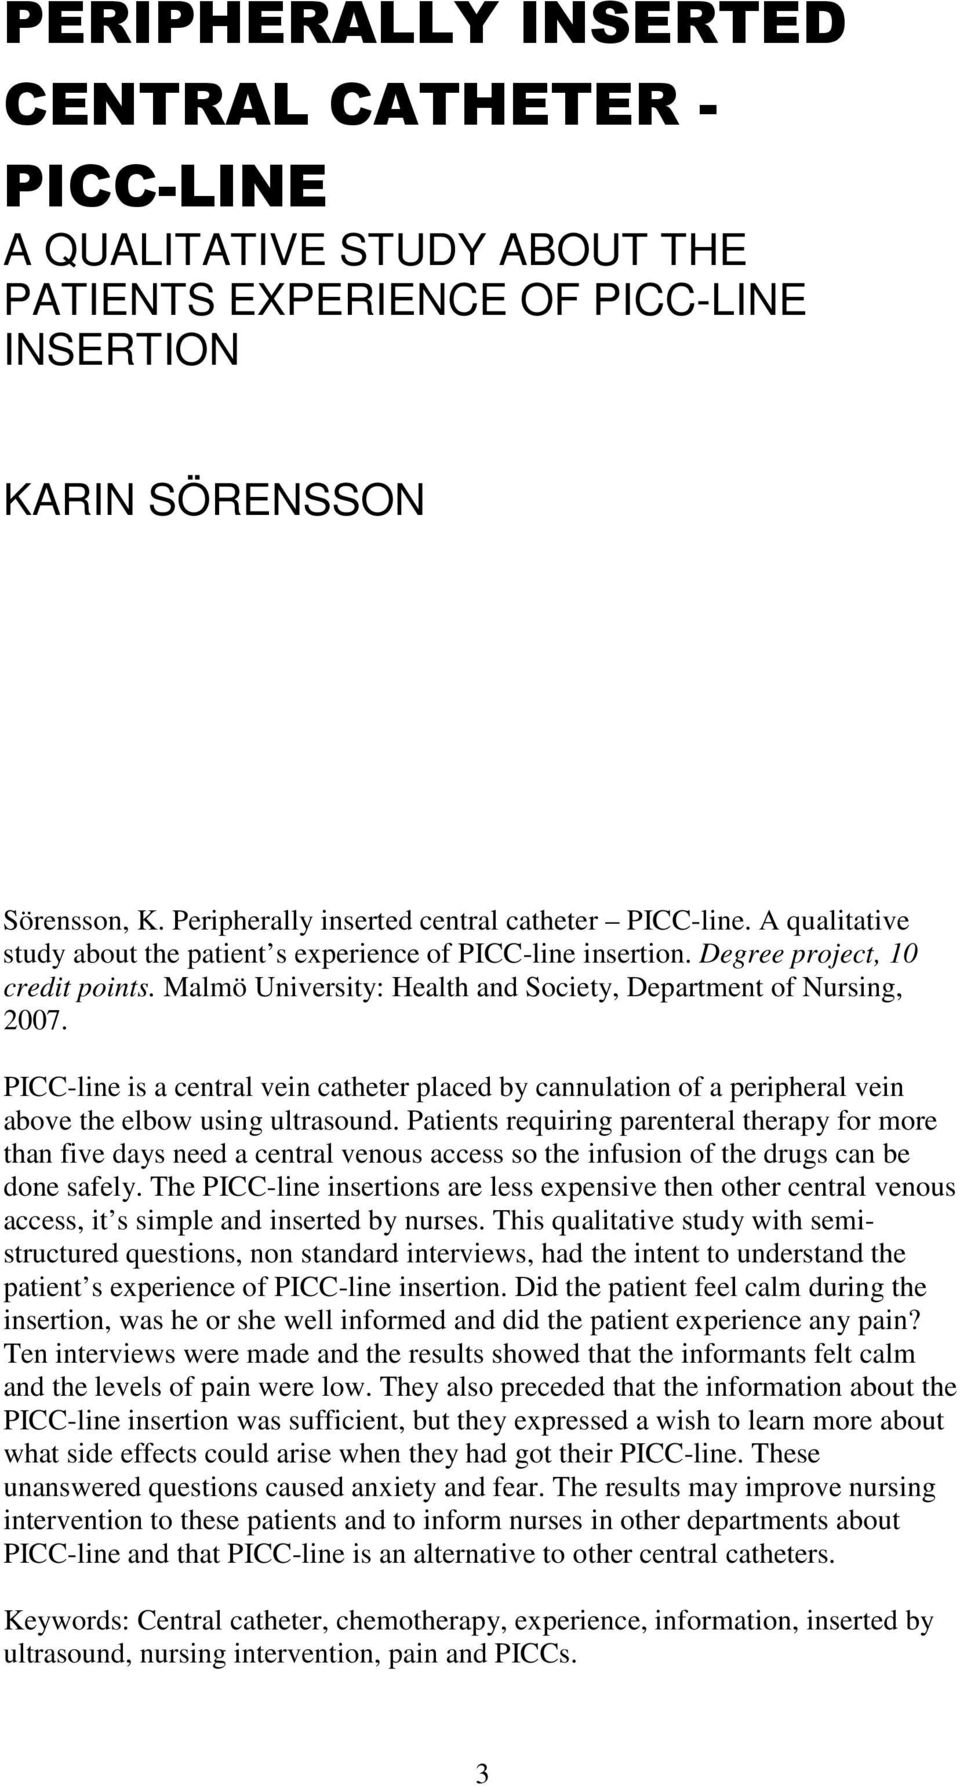 Malmö University: Health and Society, Department of Nursing, 2007. PICC-line is a central vein catheter placed by cannulation of a peripheral vein above the elbow using ultrasound.